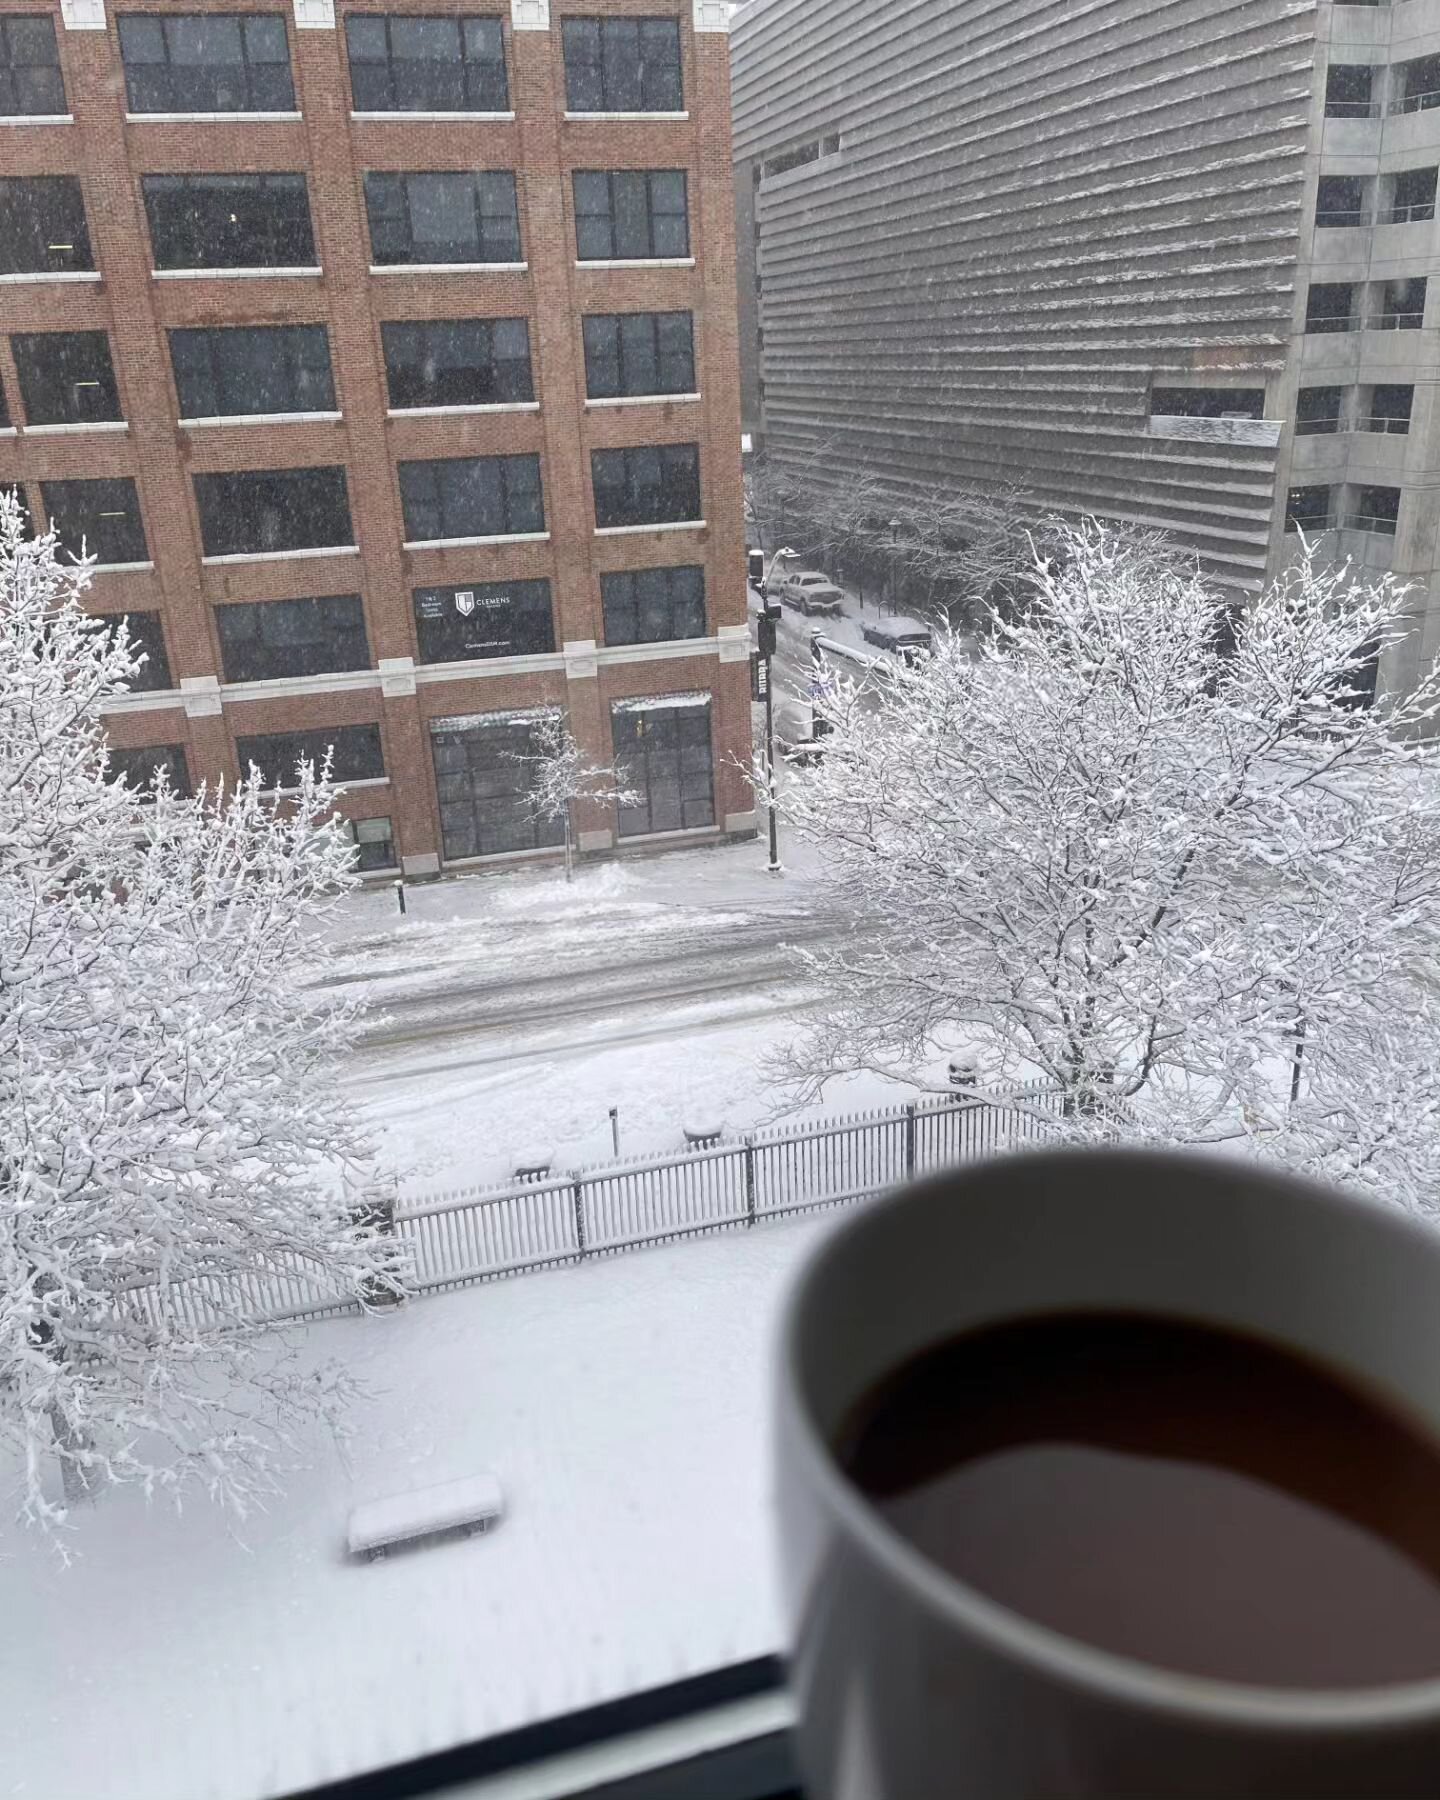 Cup'a Joe ☕
Bookin' shows 💻
And watchin' snow ❄️-stay safe out there friends!
.
.
#snow #coffee #bookingshows #midwestweather #iowaweather